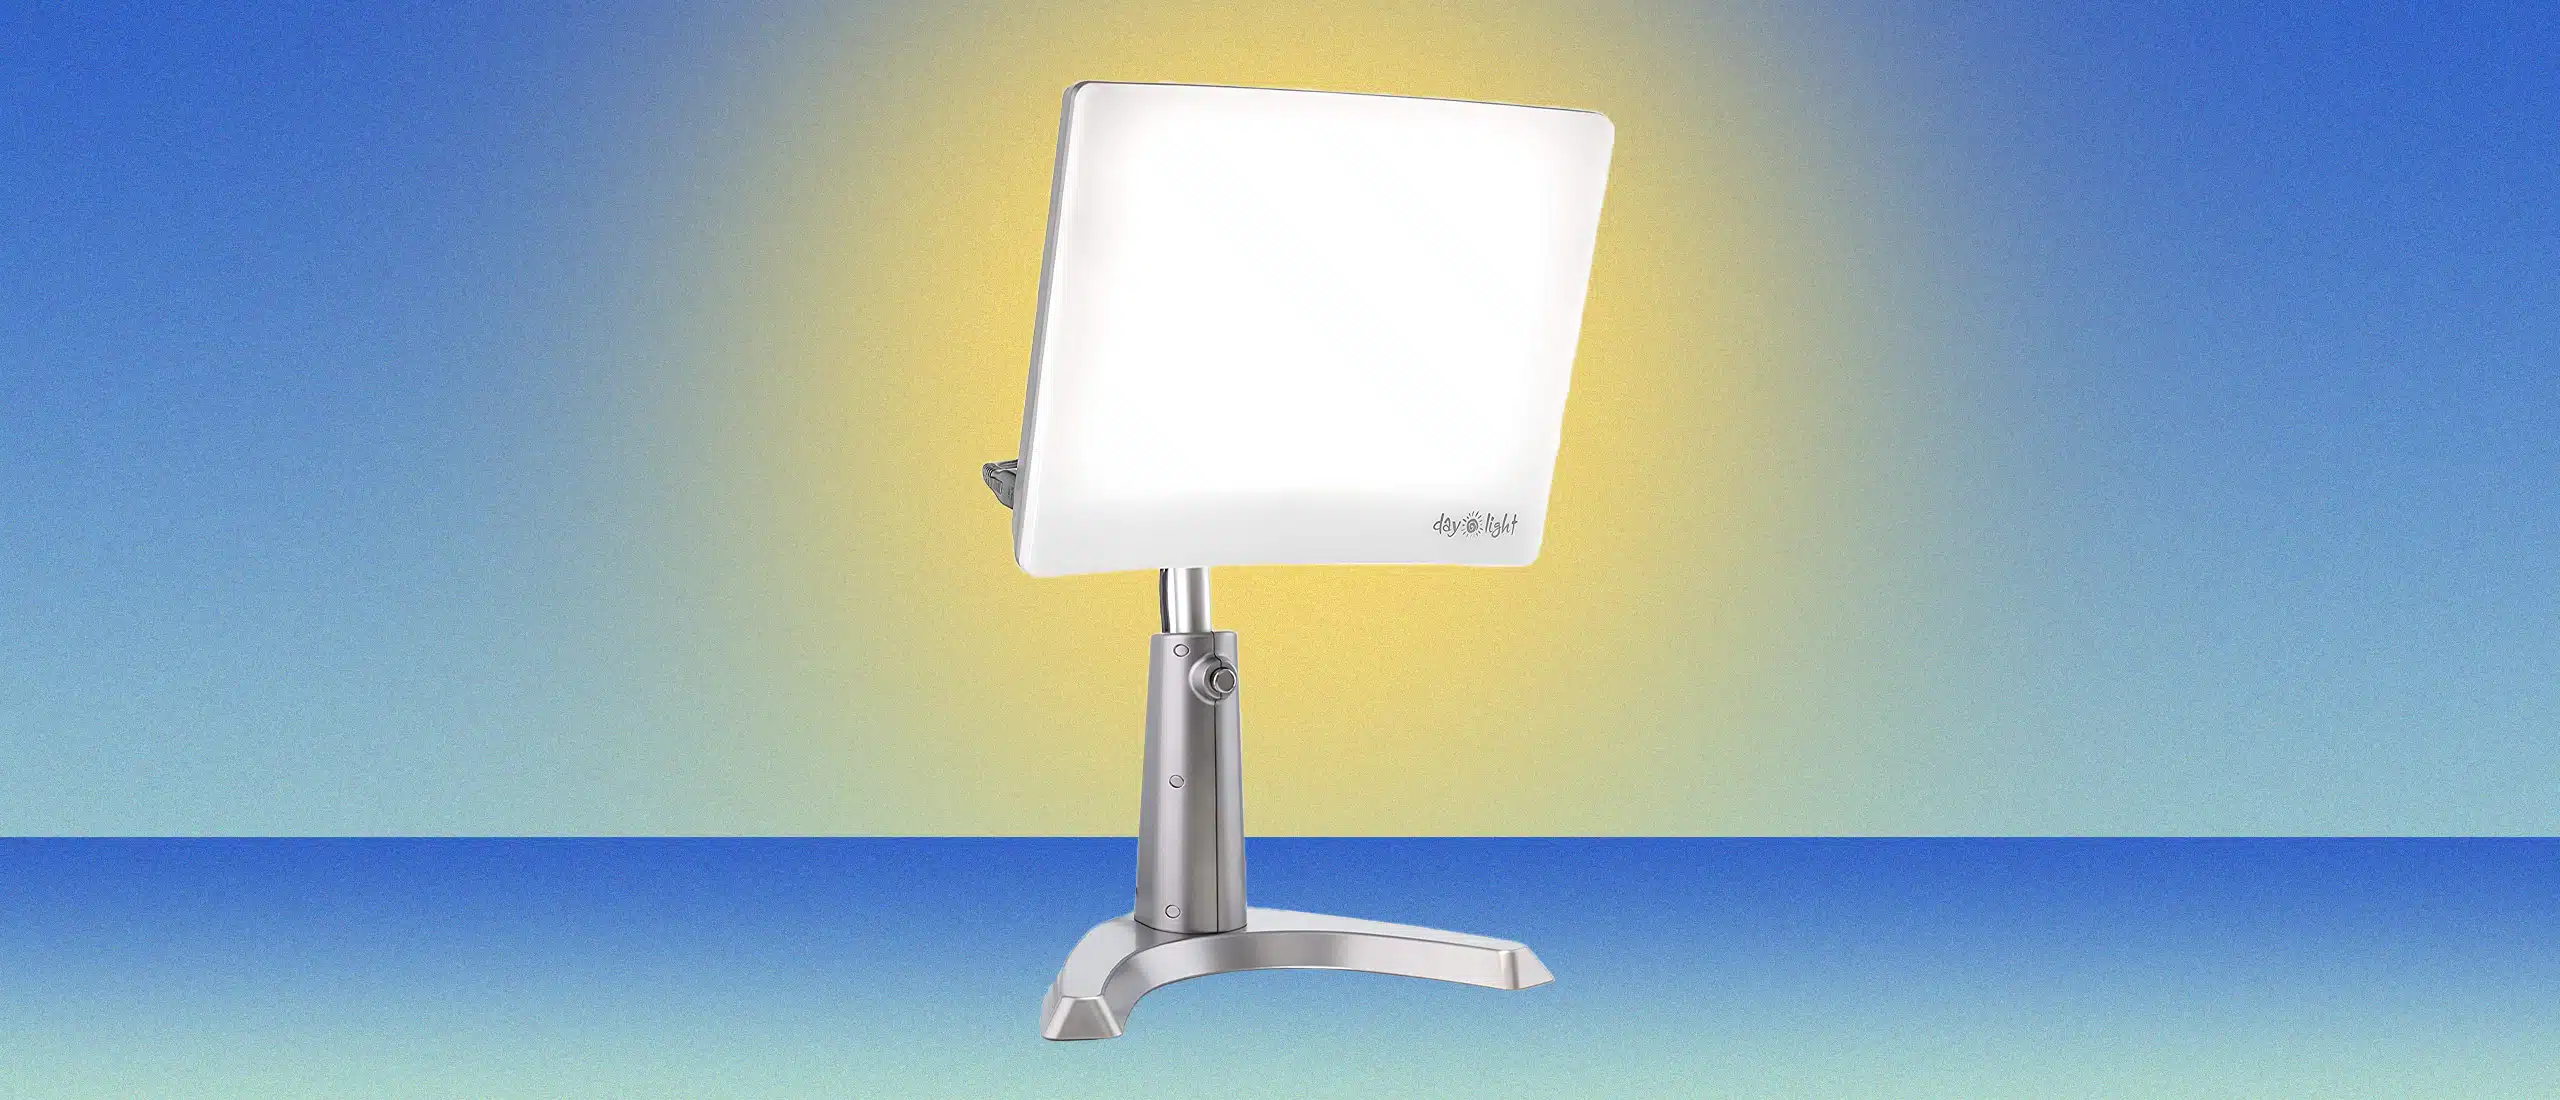 sun light therapy lamp on blueish green background